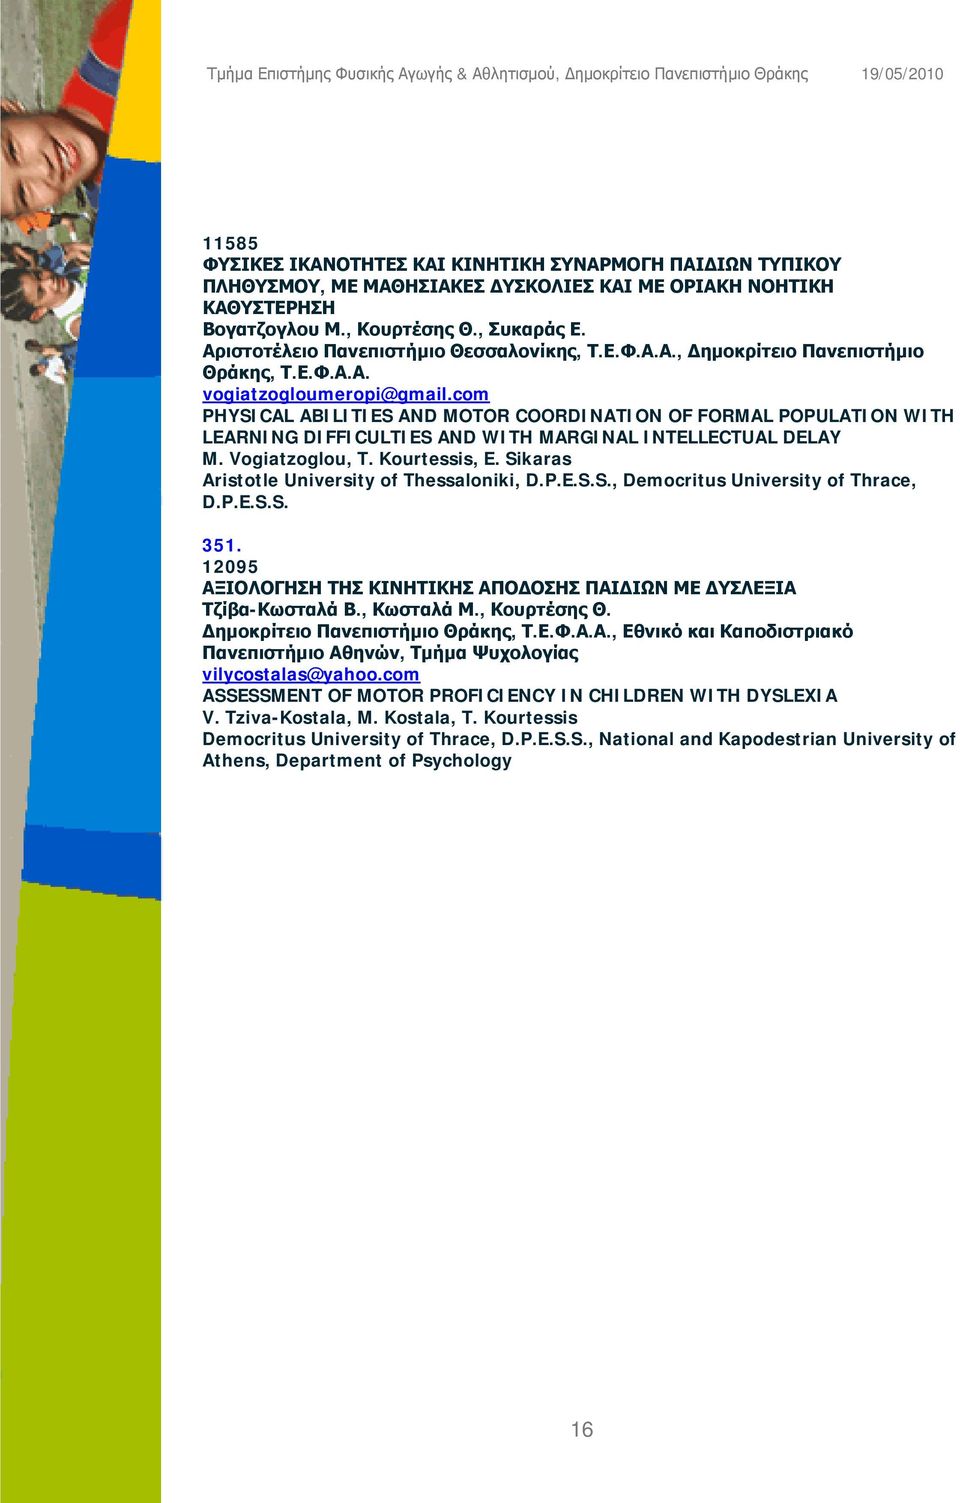 com PHYSICAL ABILITIES AND MOTOR COORDINATION OF FORMAL POPULATION WITH LEARNING DIFFICULTIES AND WITH MARGINAL INTELLECTUAL DELAY M. Vogiatzoglou, T. Kourtessis, E.